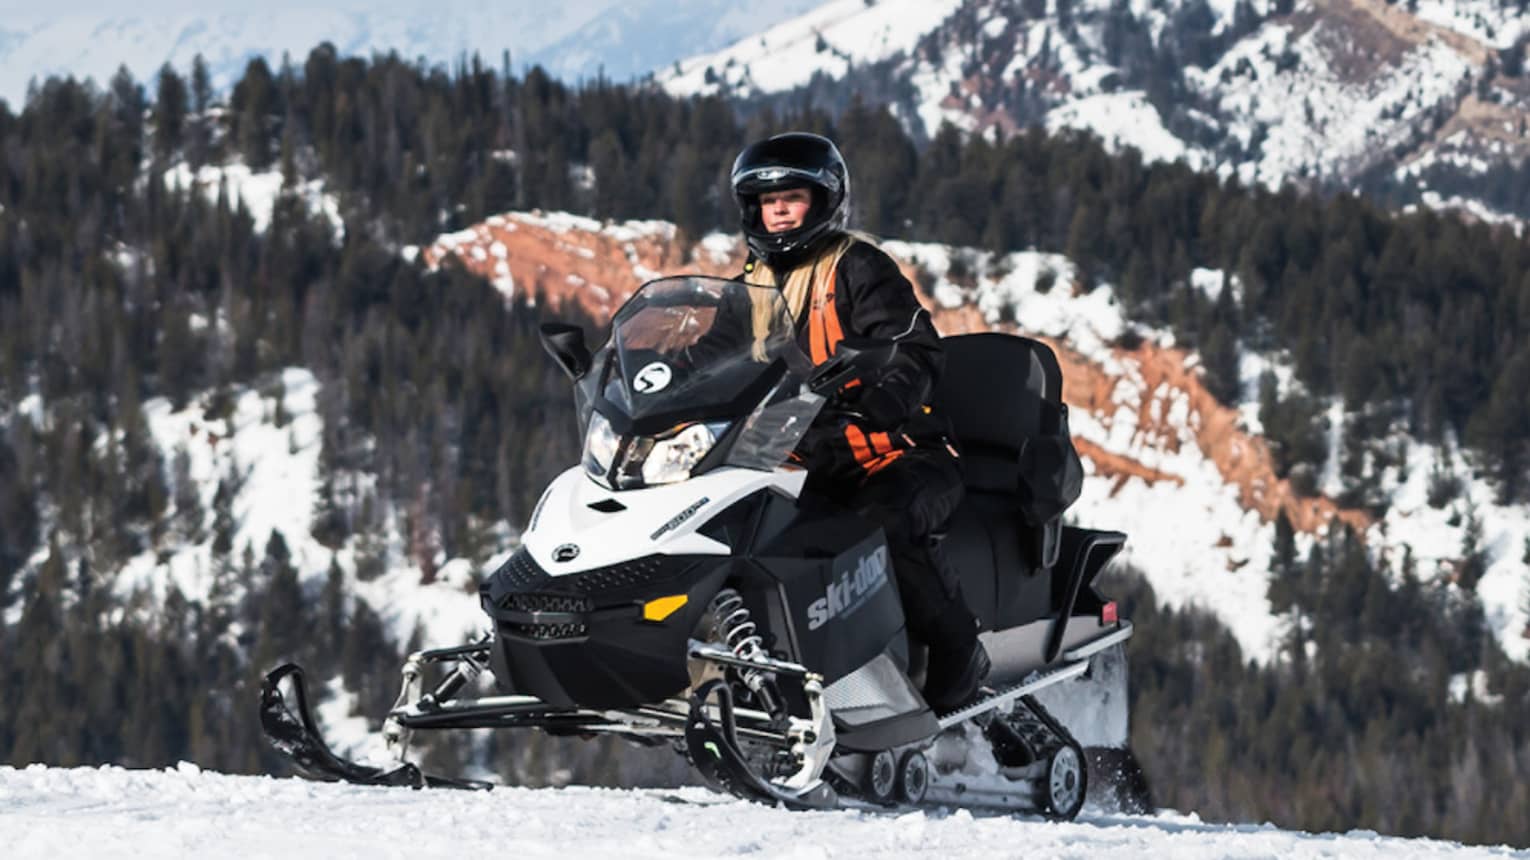 Person in snow gear on snowmobile with snowy mountain in backdrop